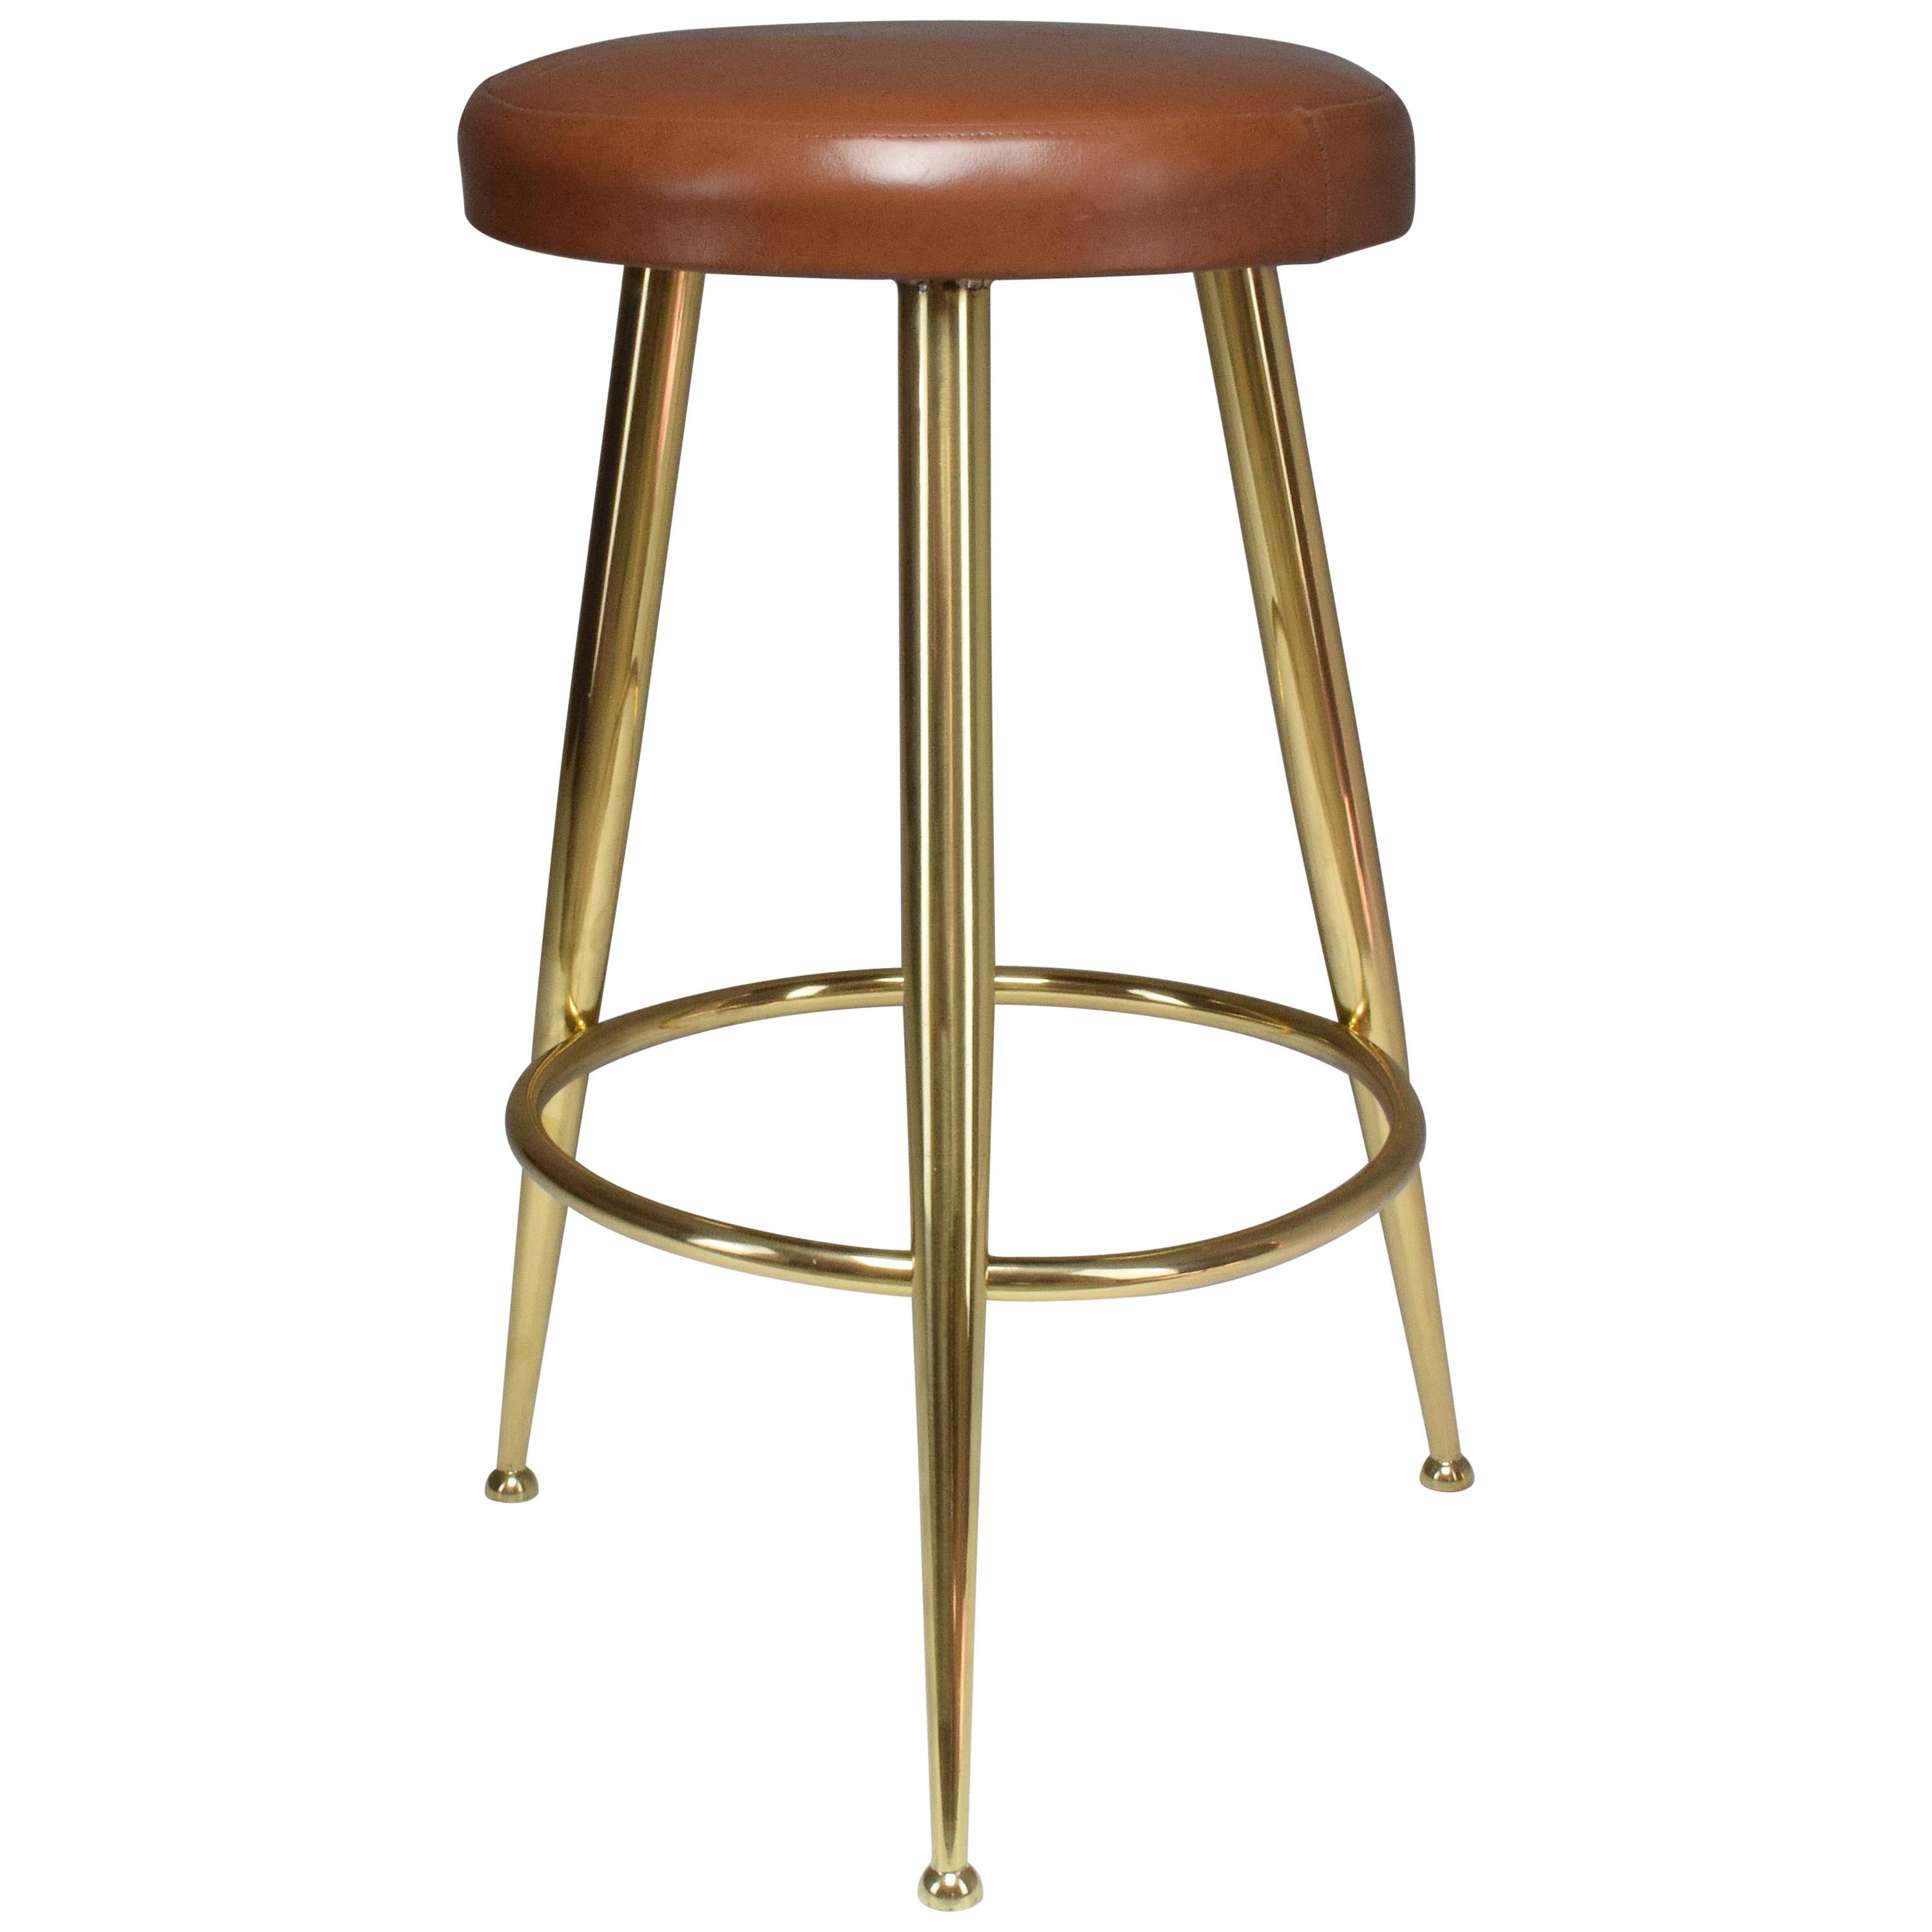 Italian Midcentury Brass and Leather Stool by Ico Parisi, 1950s 